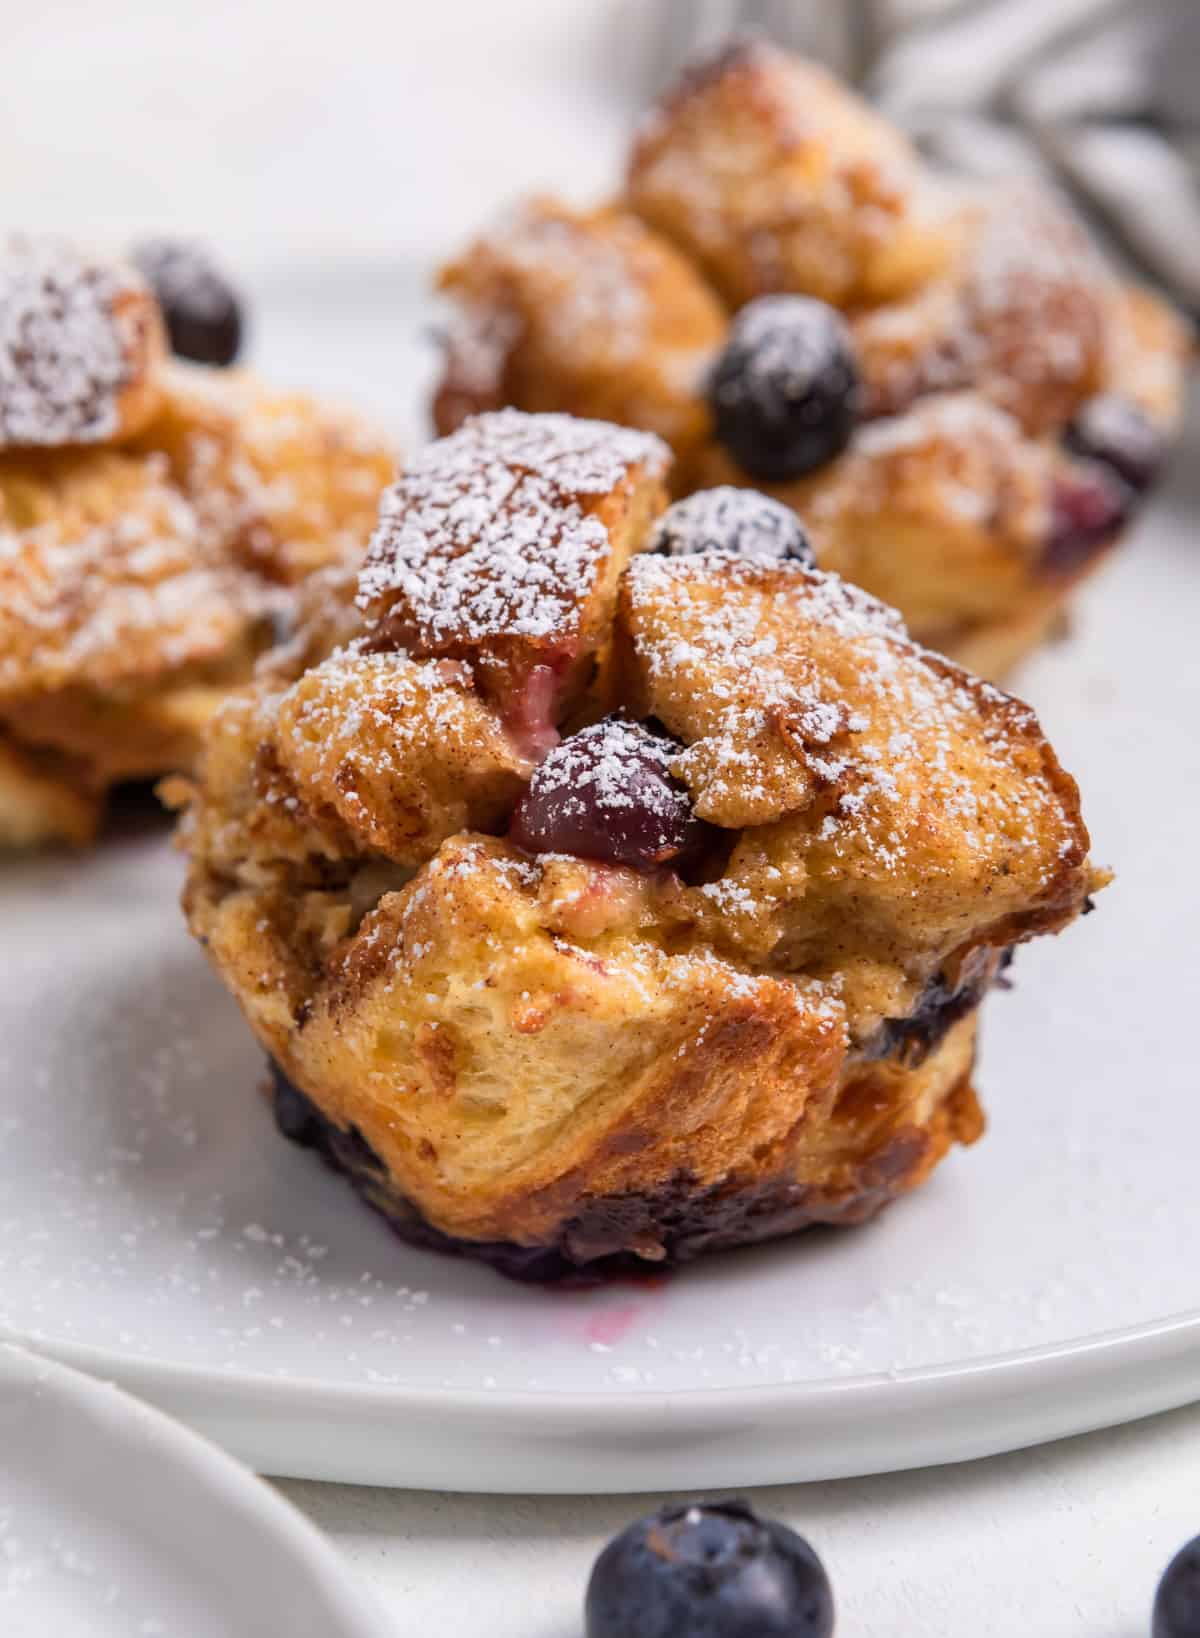 Blueberry French Toast cups on white plate with powdered sugar dusted over top.